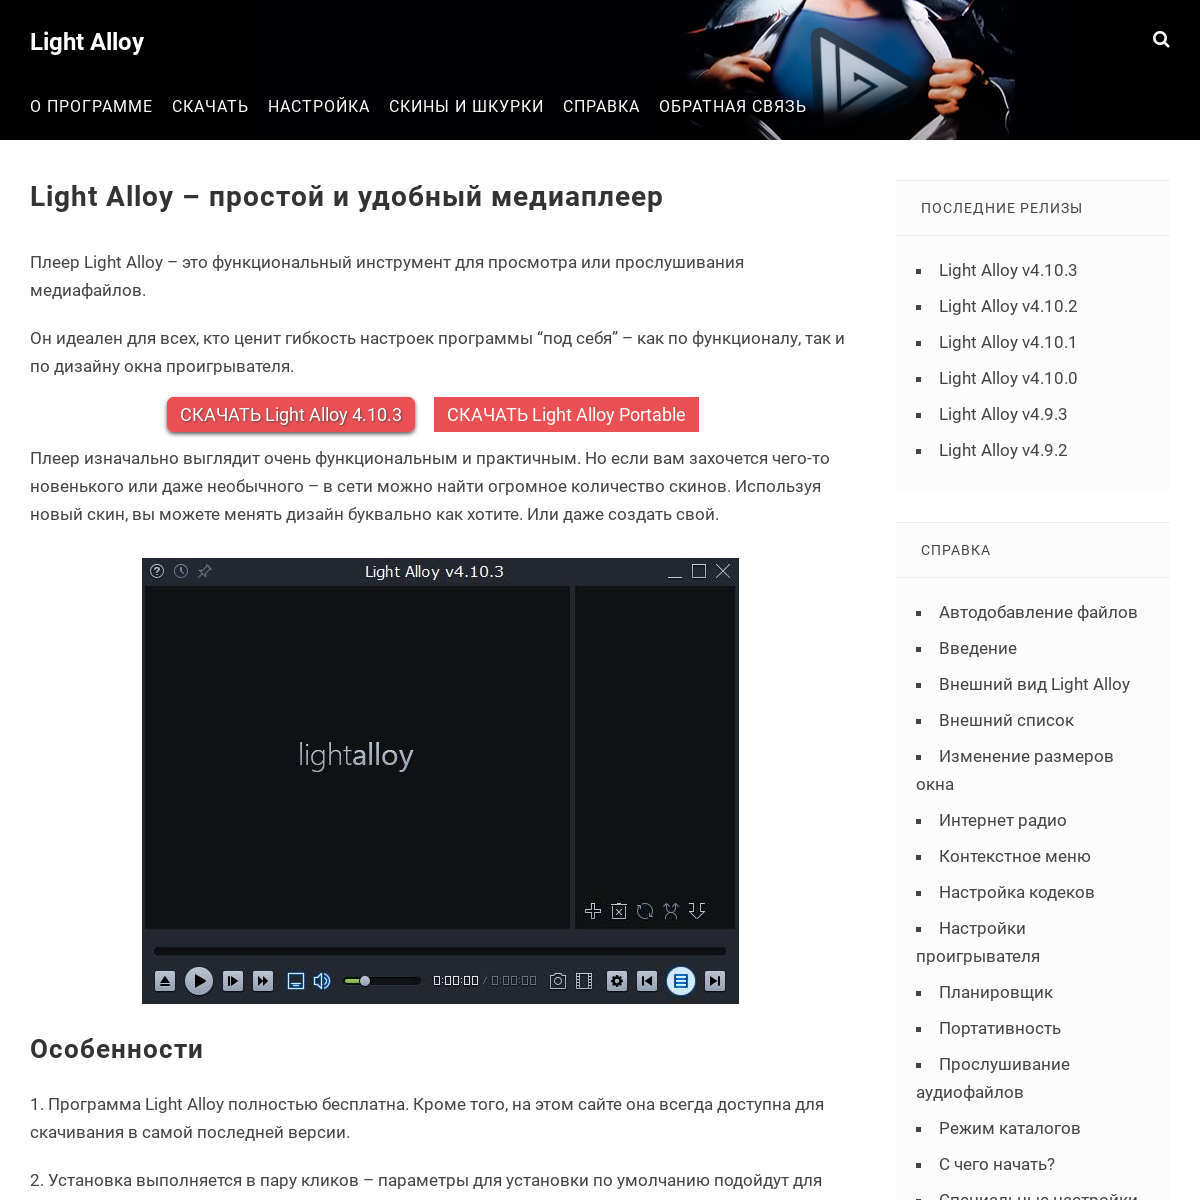 A complete backup of light-alloy.ru